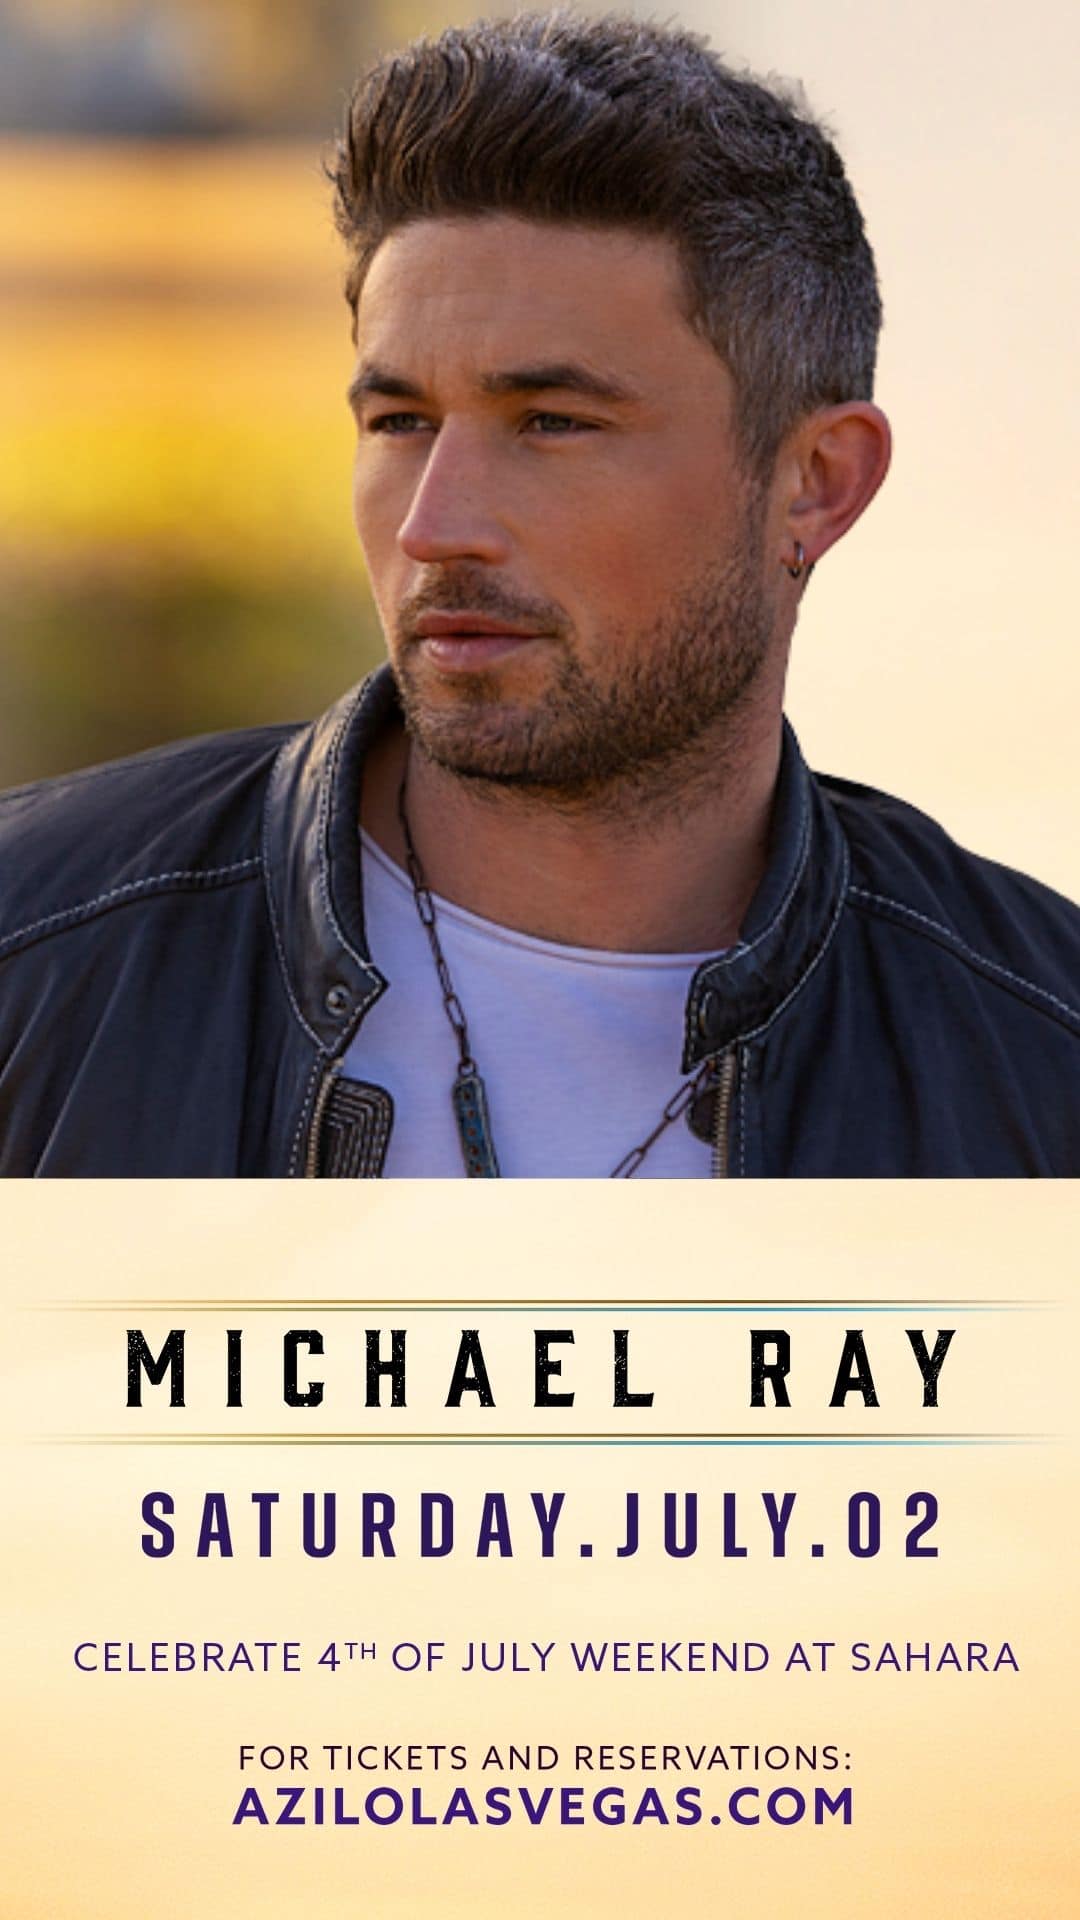 Headshot of Michael Ray and a visual for his concert on Saturday, July 2